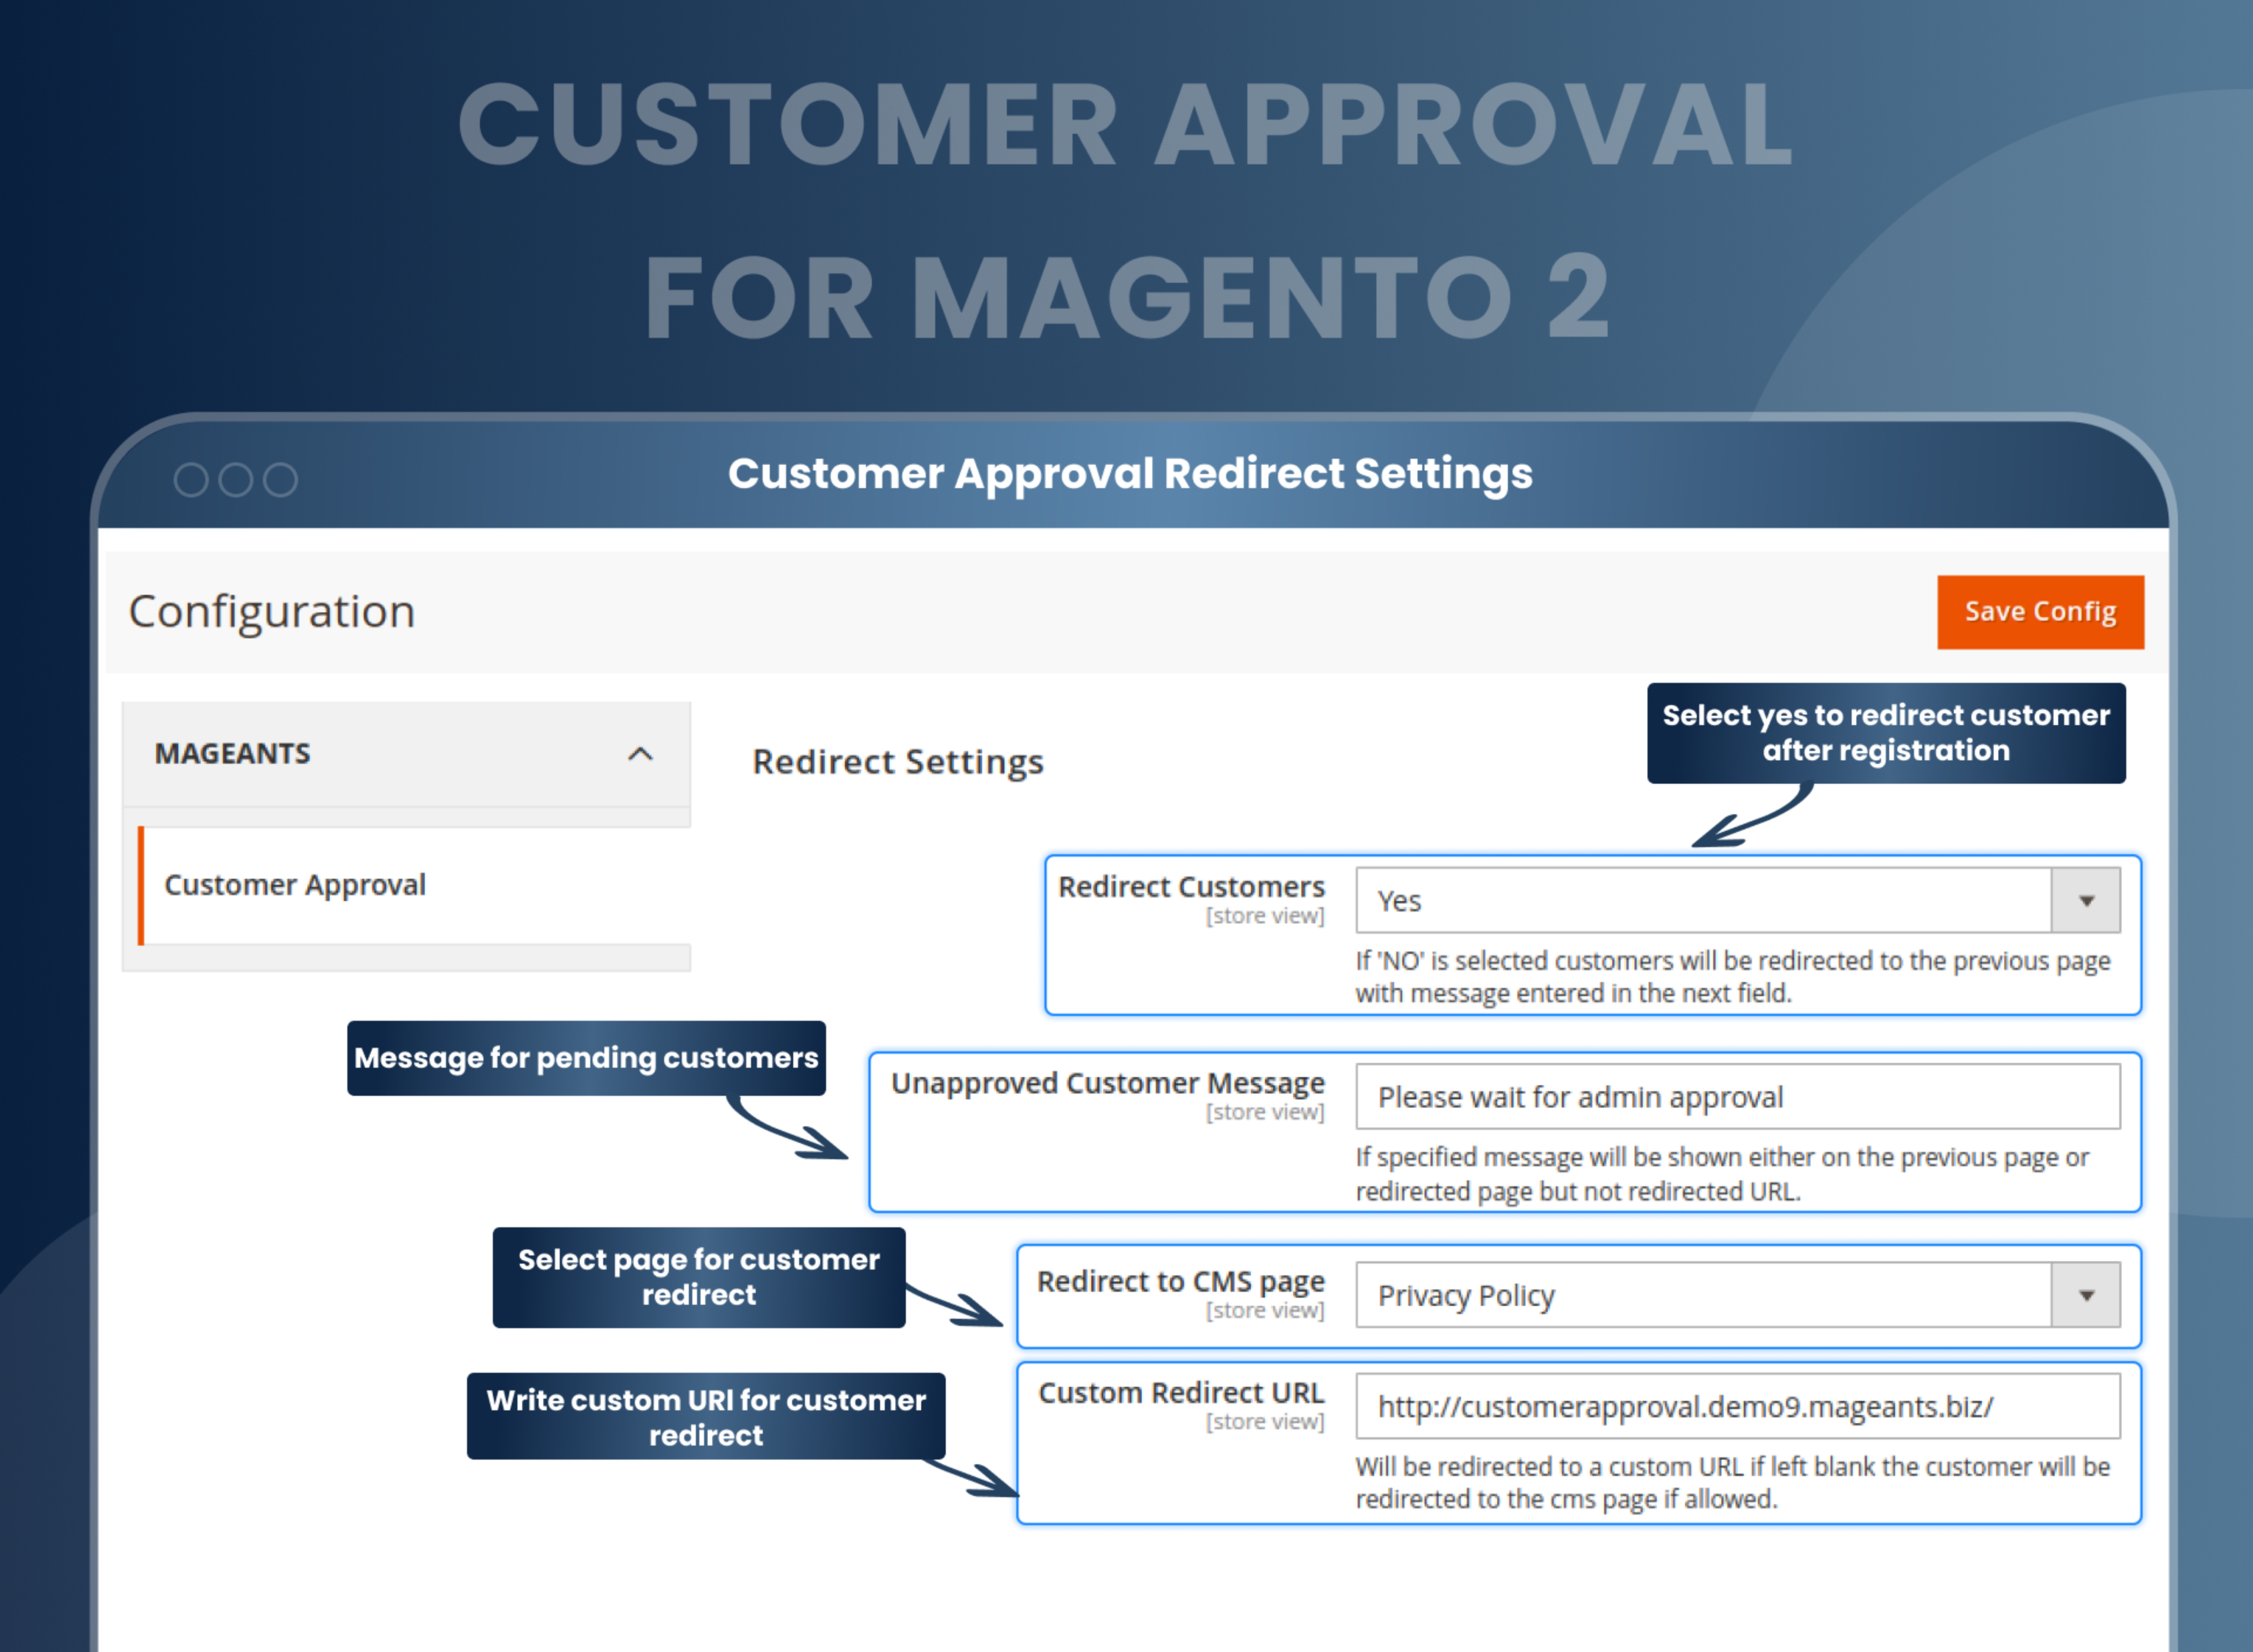 Customer Approval Redirect Settings